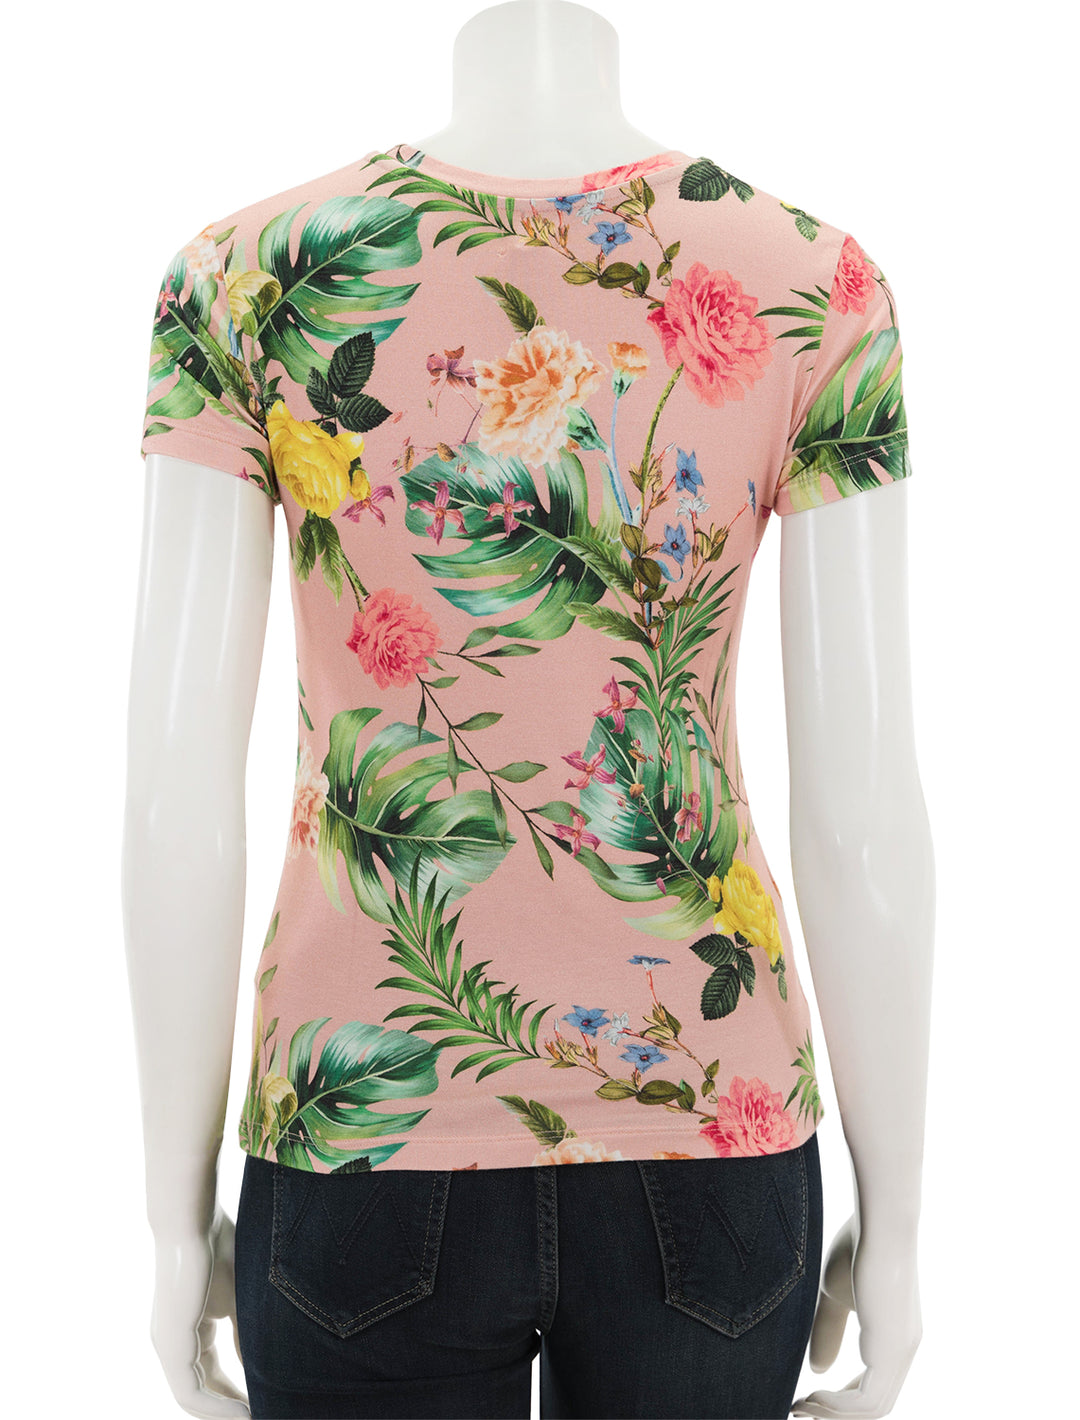 Back view of L'agence's ressi tee in tropical flower.